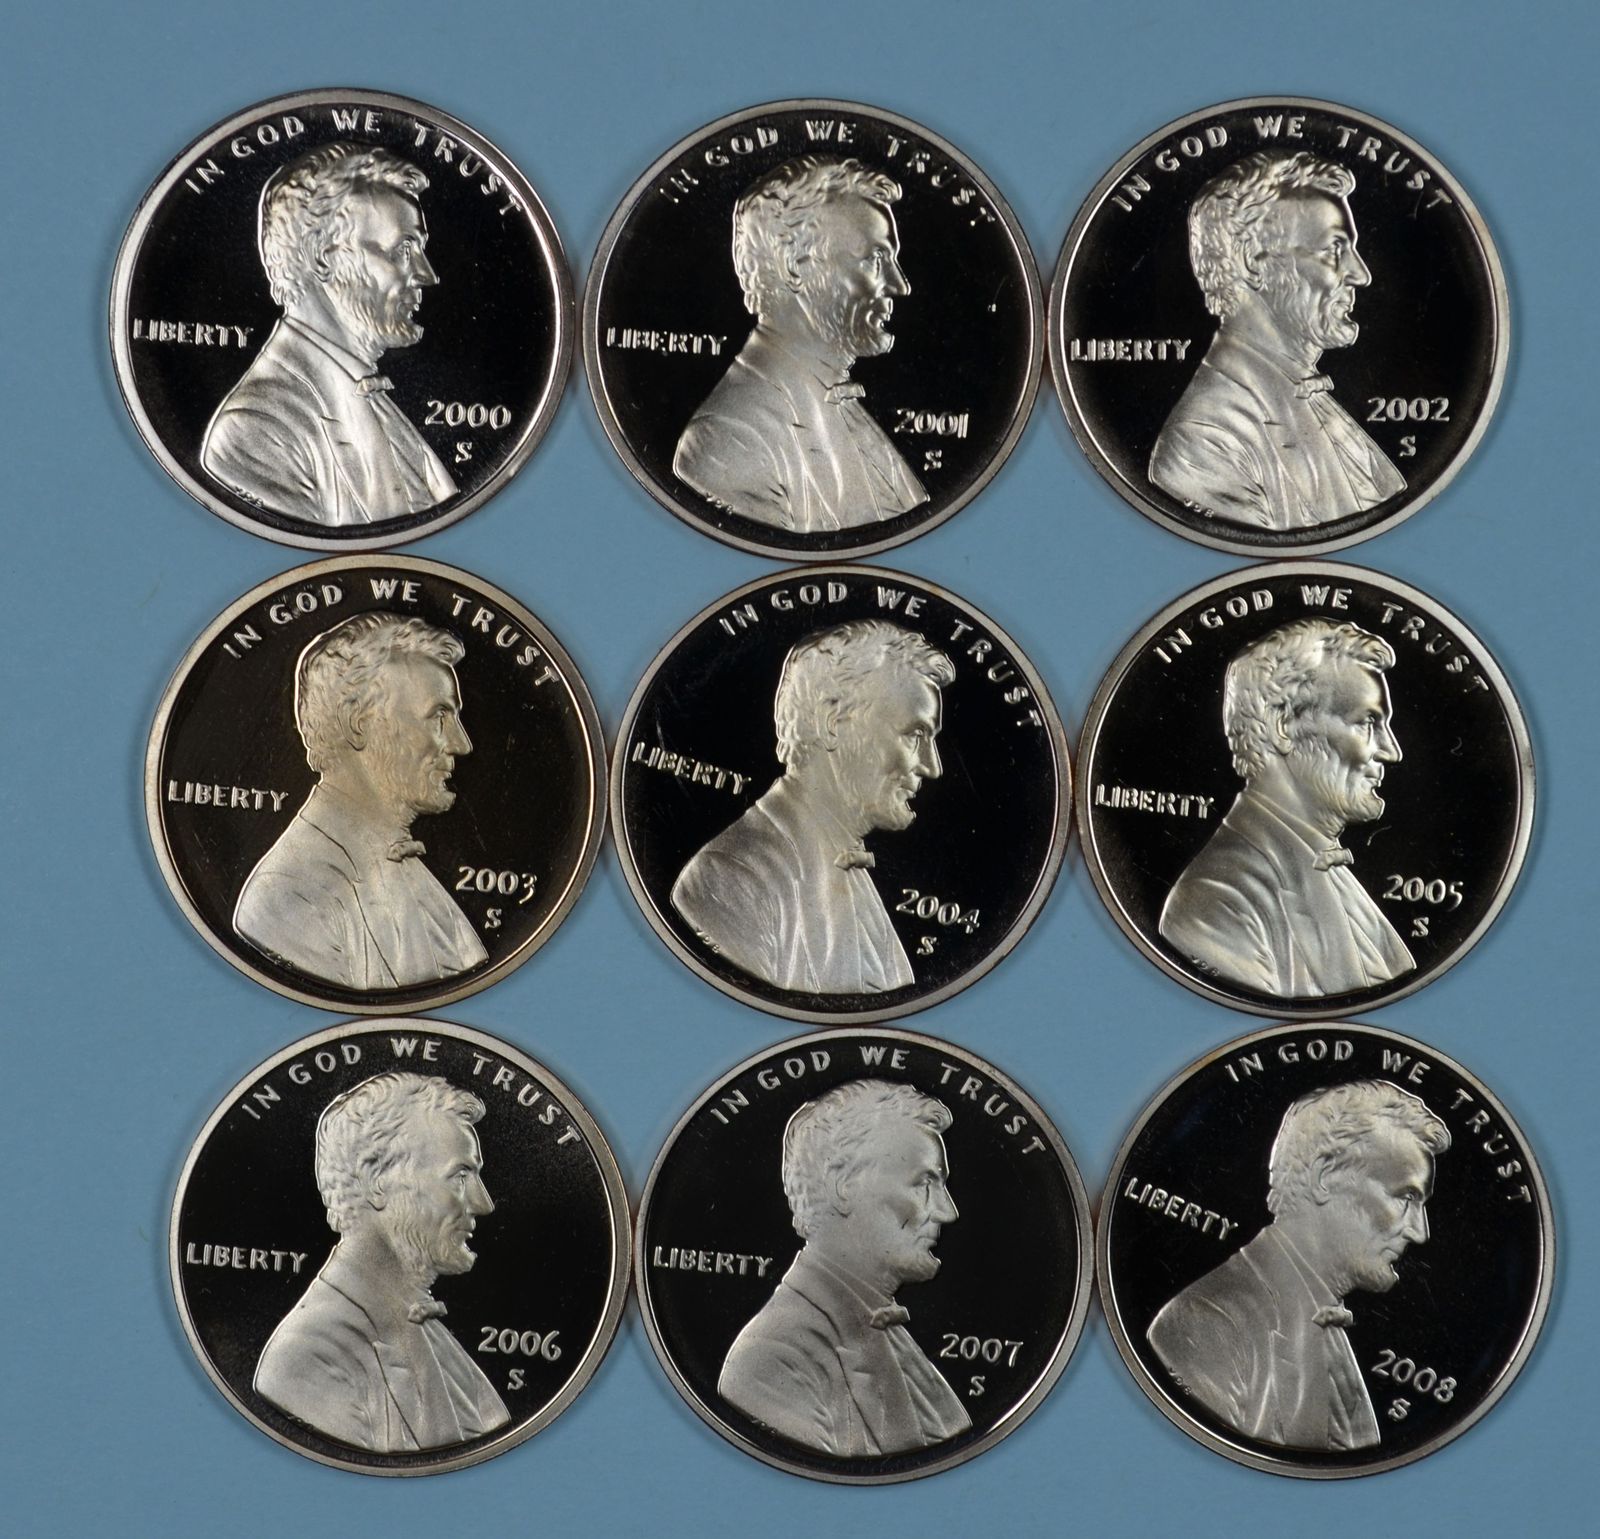 2000 - 2008 S Lincoln Memorial Proof penny/cent set - $15.00